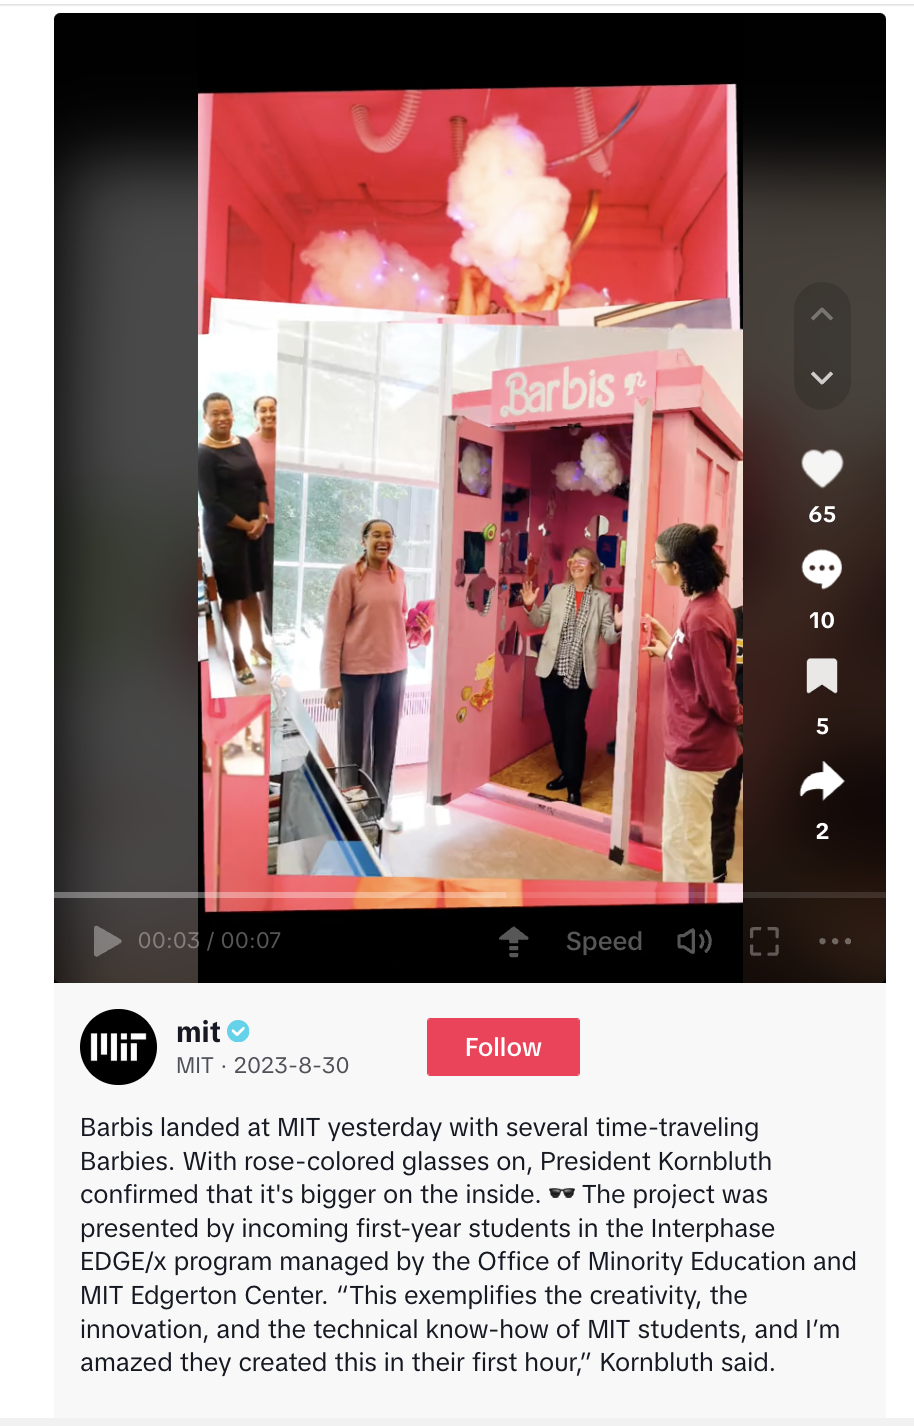 A TikTok video by MIT featuring students creating a "Barbis" box, which is a nod to the Barbie movie trends.